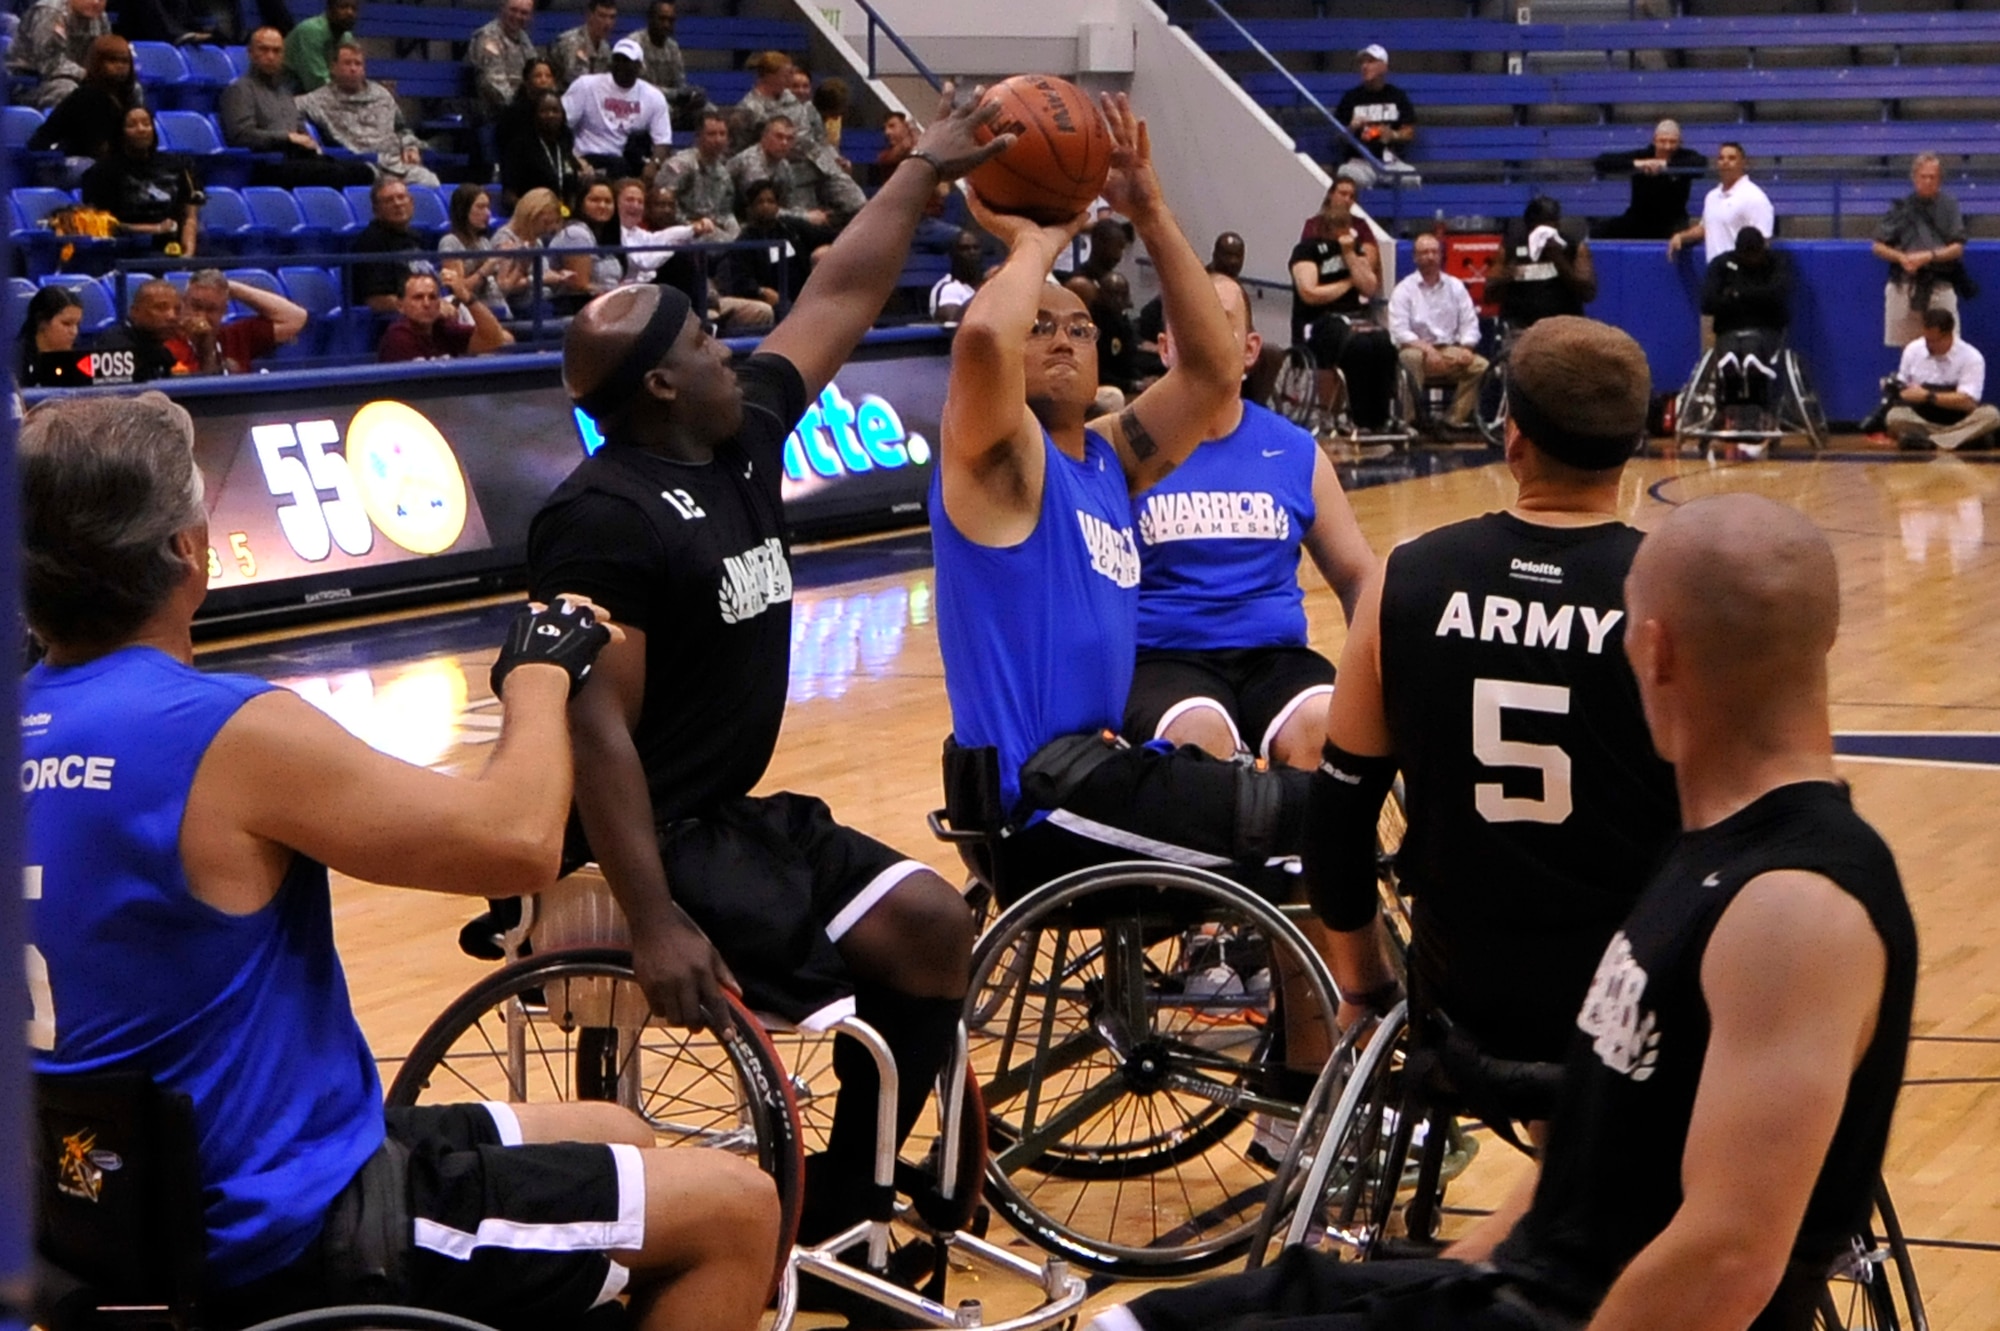 Master Sgt. Christopher Aguilera pulls up for a shot against the U.S.Army
during a Warrior Games wheelchair basketball contest at the U.S. Air Force Academy, Colo., May 2, 2012. The Warrior Games provides a springboard for wounded veterans and service members to compete in Paralympic sports against other U.S. services. (U.S. Air Force photo/Staff Sgt. Christopher Boitz)
